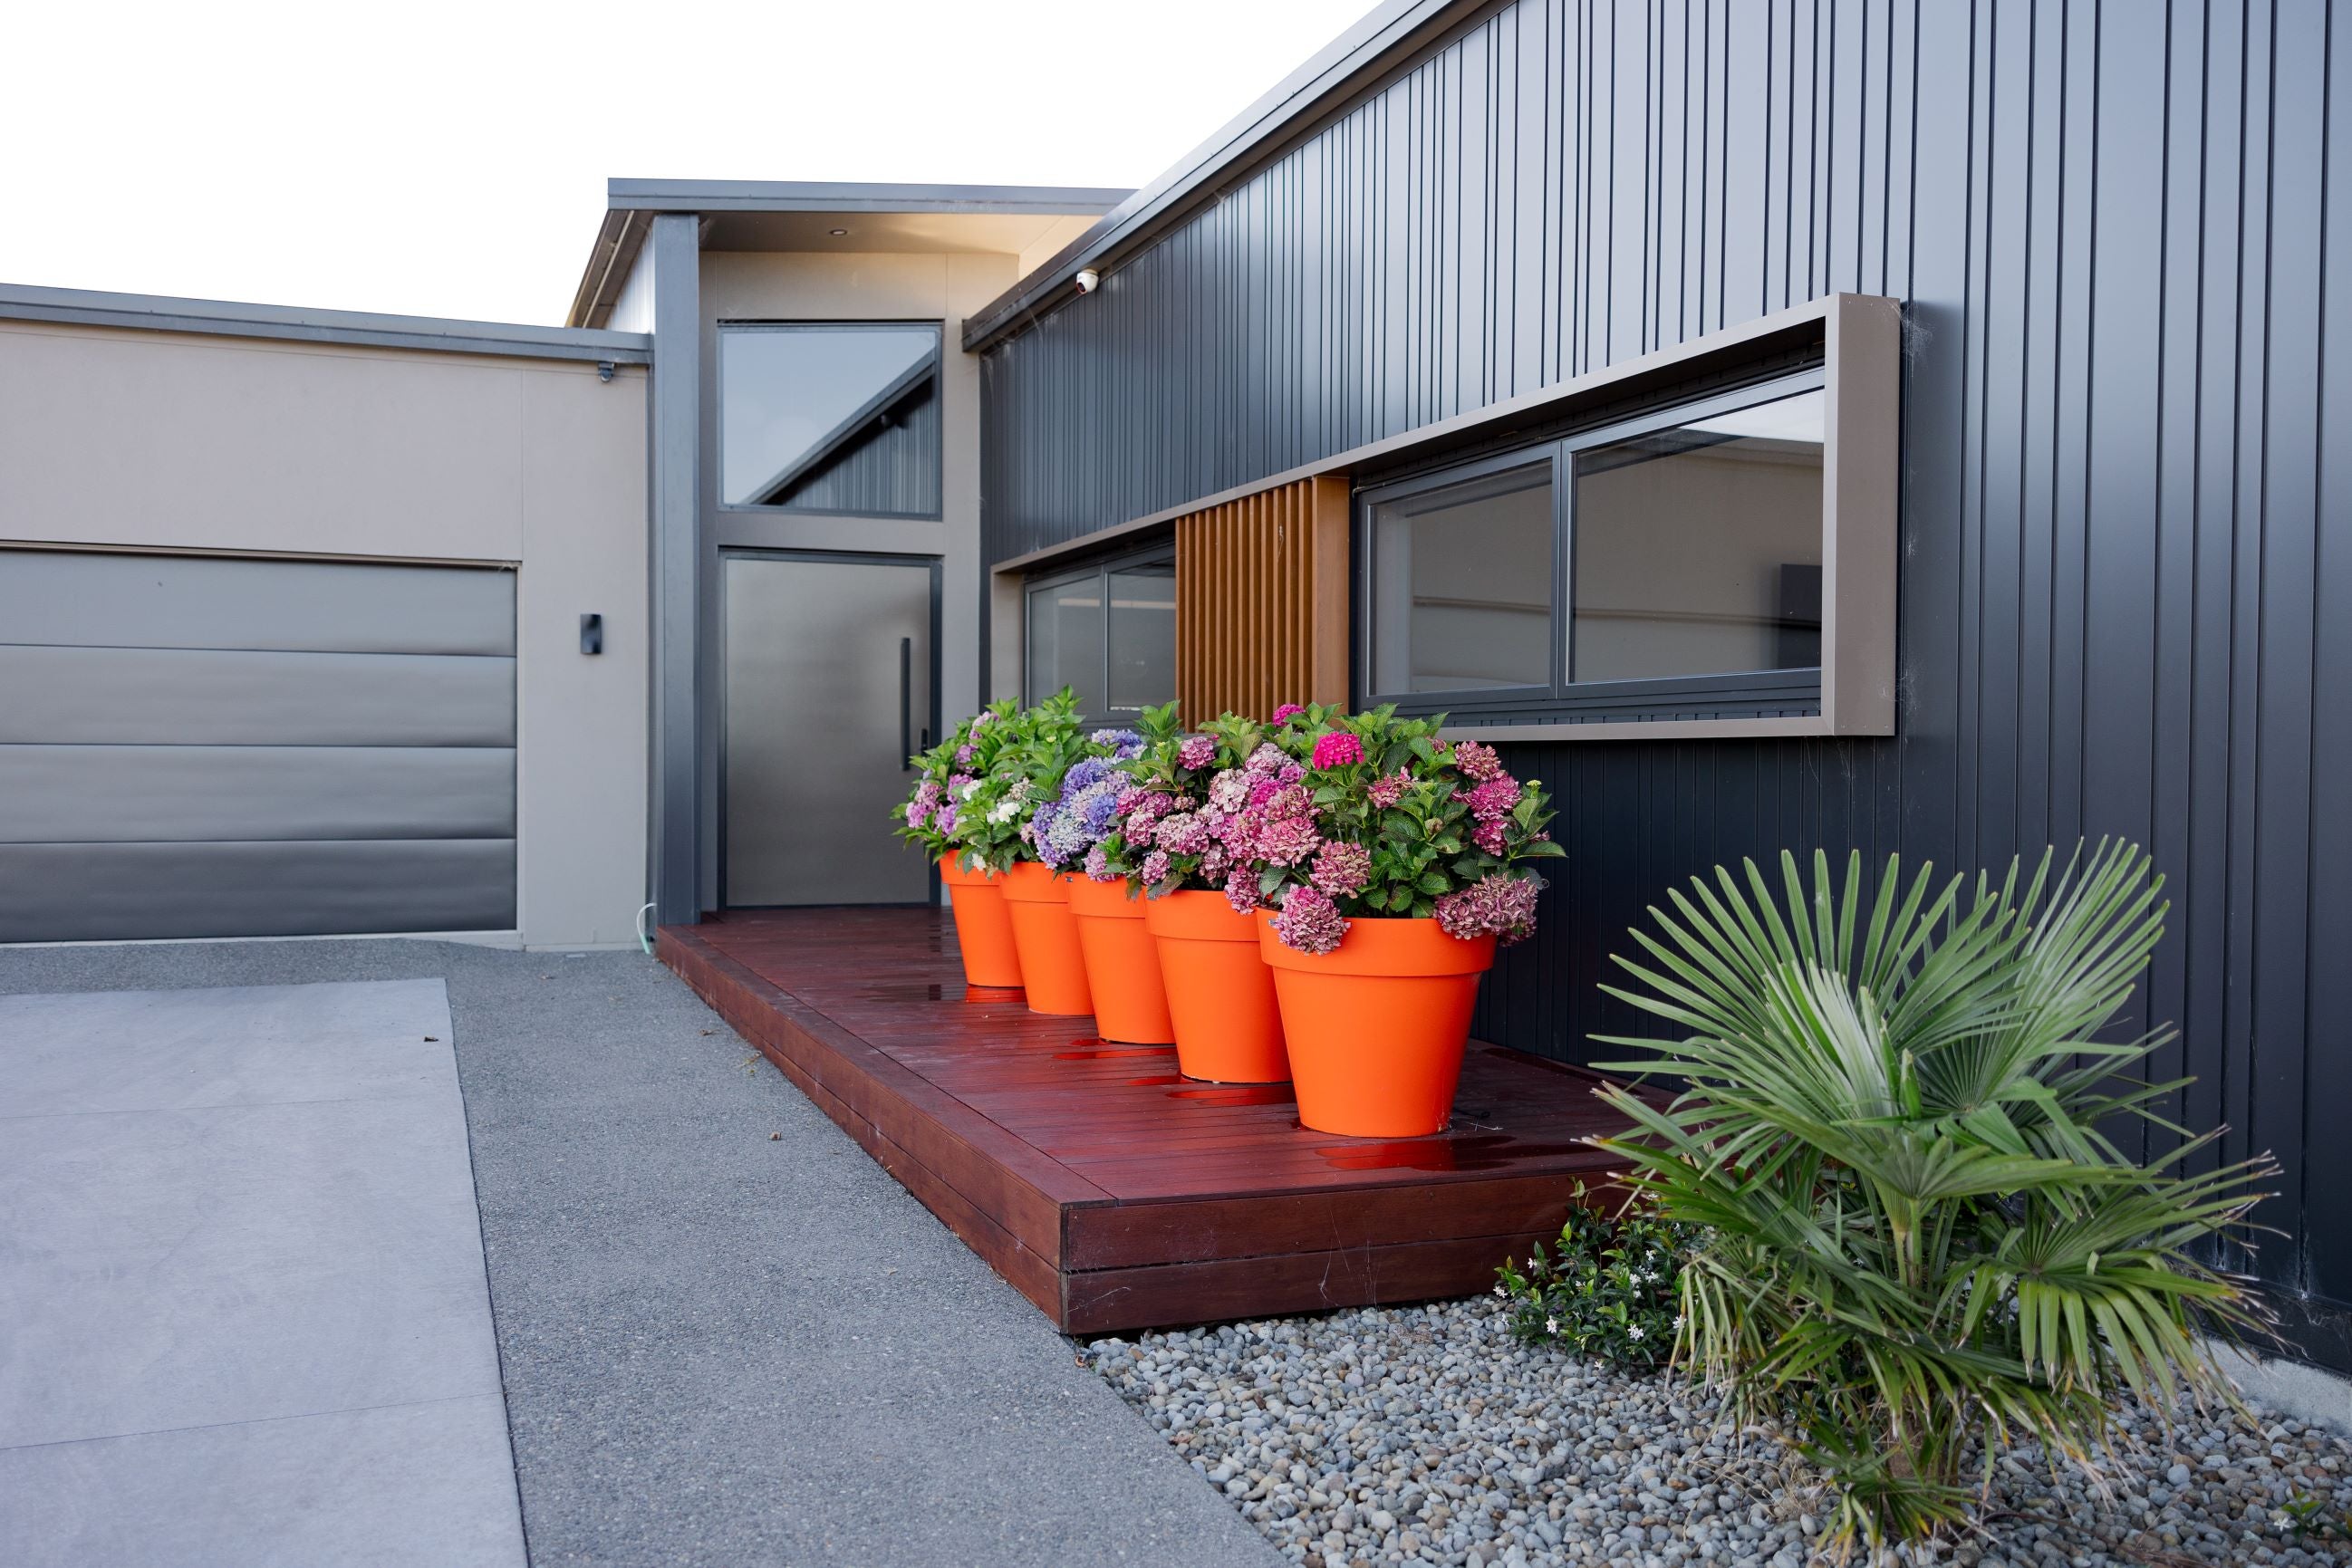 A row of orange Modscene planters sitting on a wooden deck in front of a house.